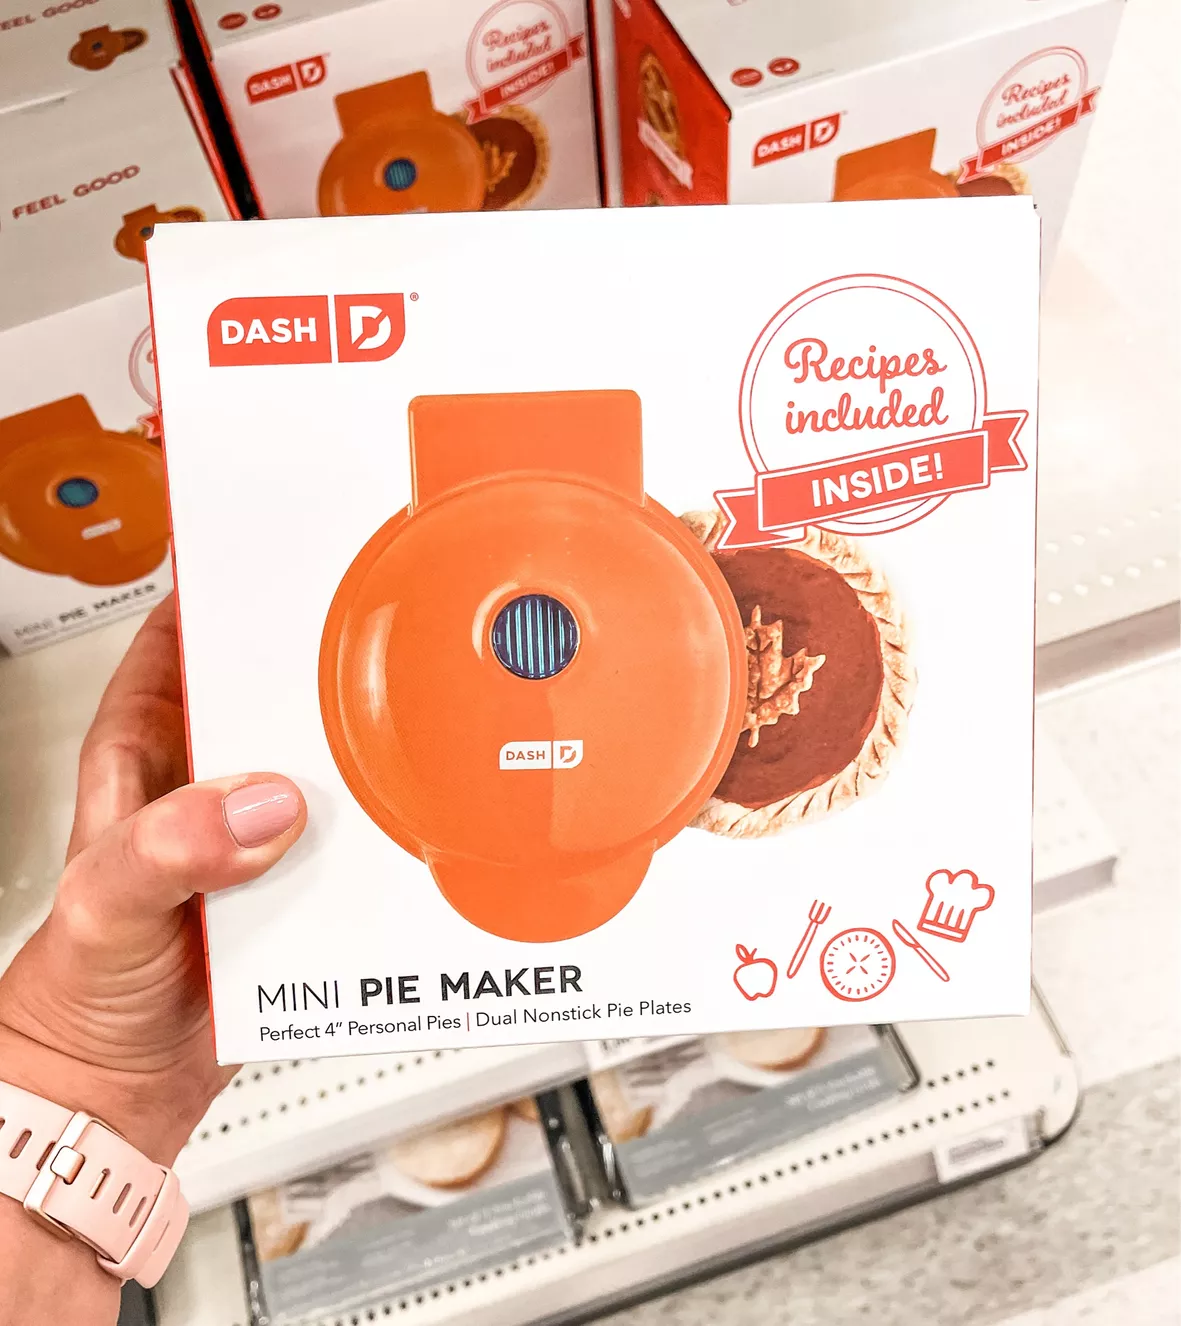 Dash Mini Pie Maker on Sale! Best Prices and Cheap Deals!